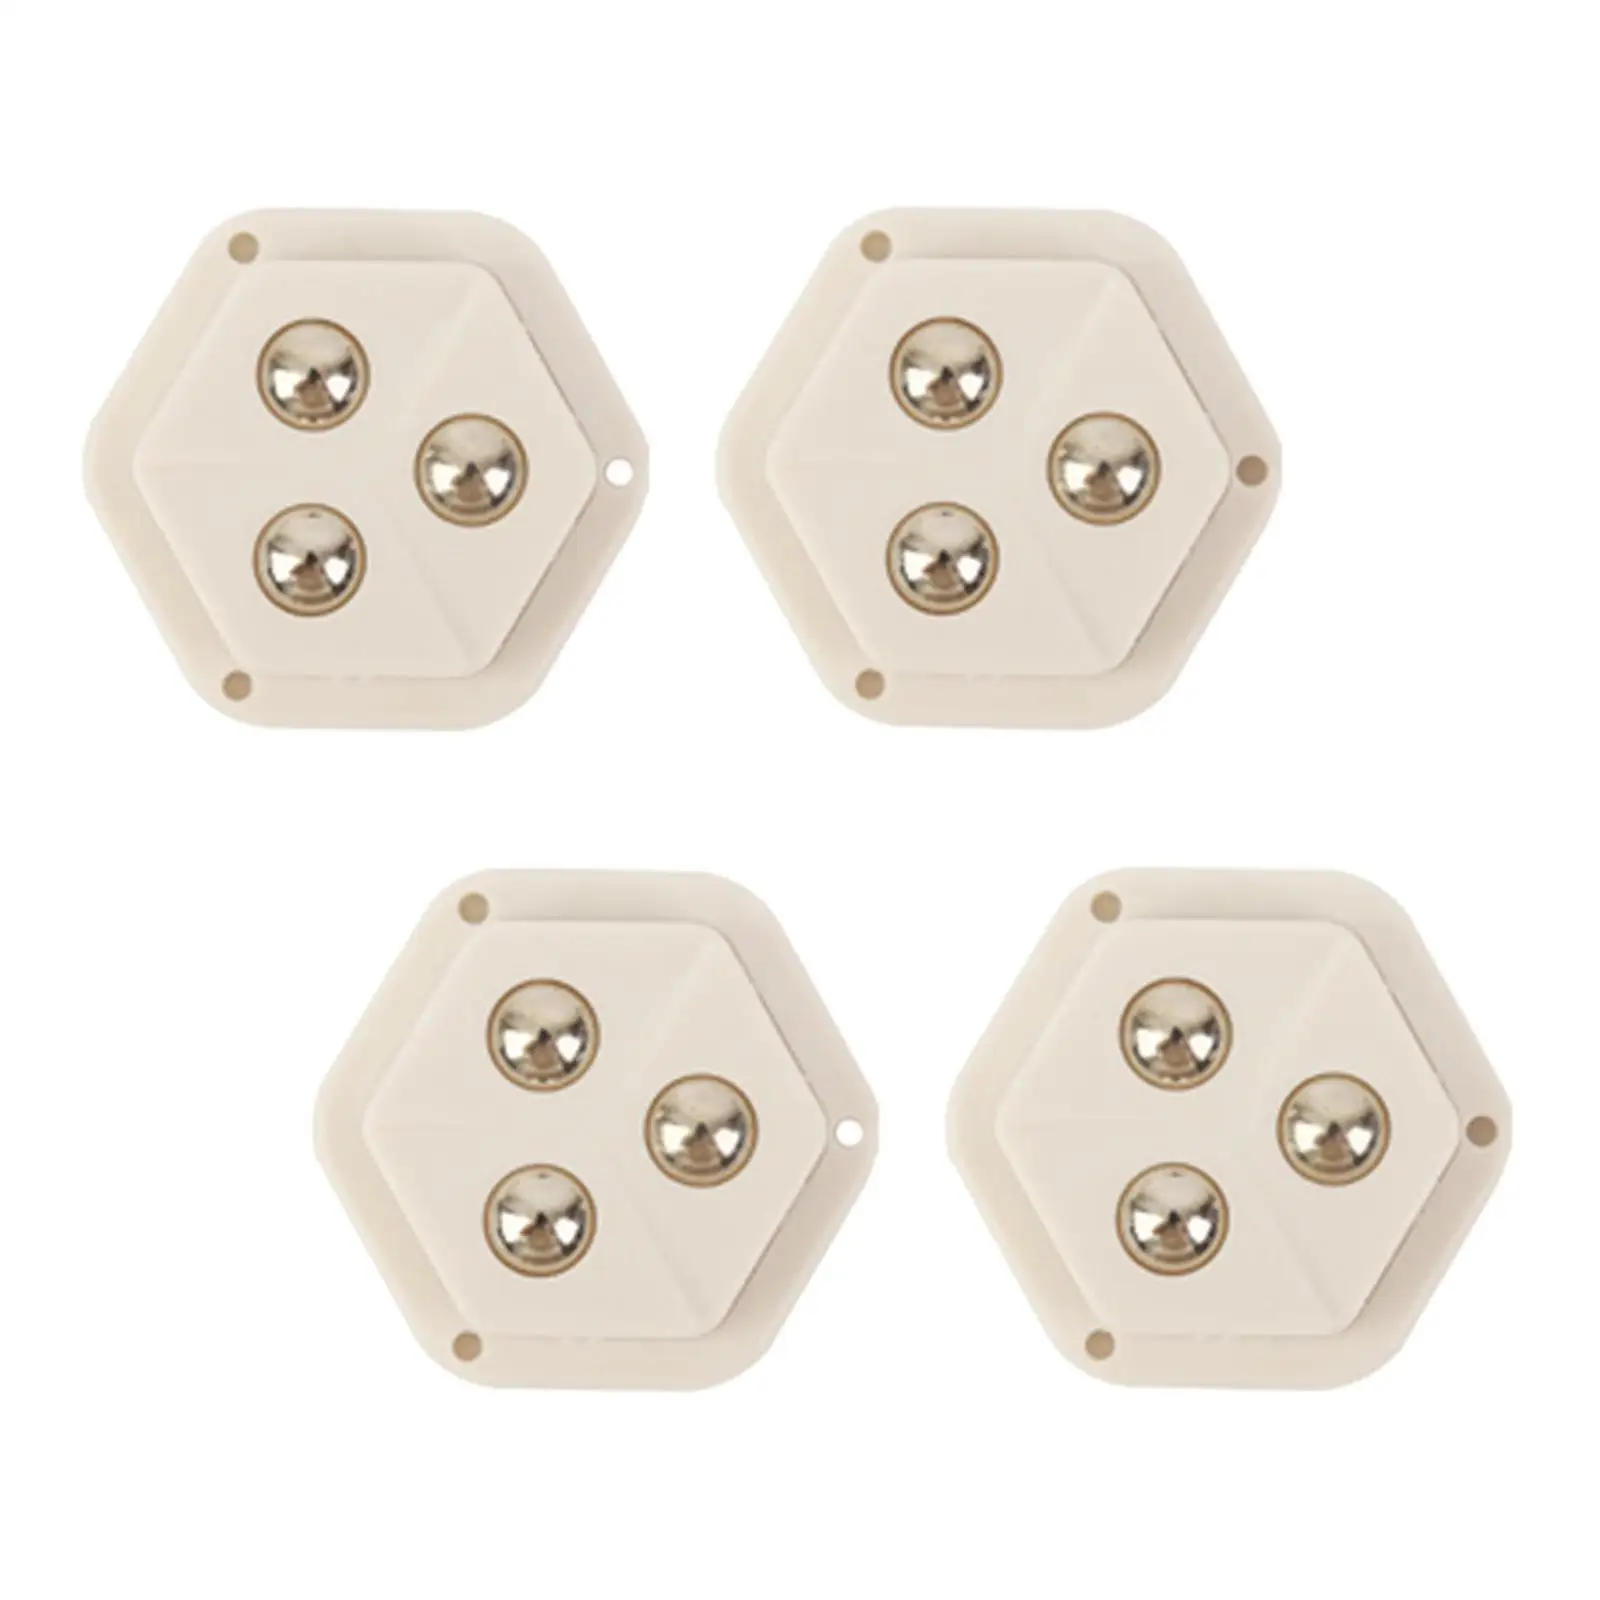 4 Pieces Rotatable Caster Wheels Caster Wheels for Trash Can Bins Box Kitchen Appliances Household Storage Box